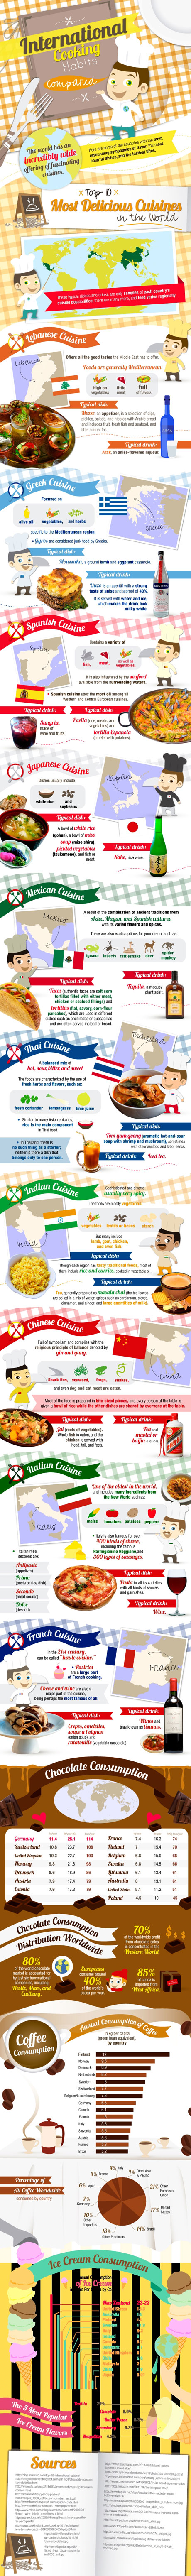 International cooking habits compared